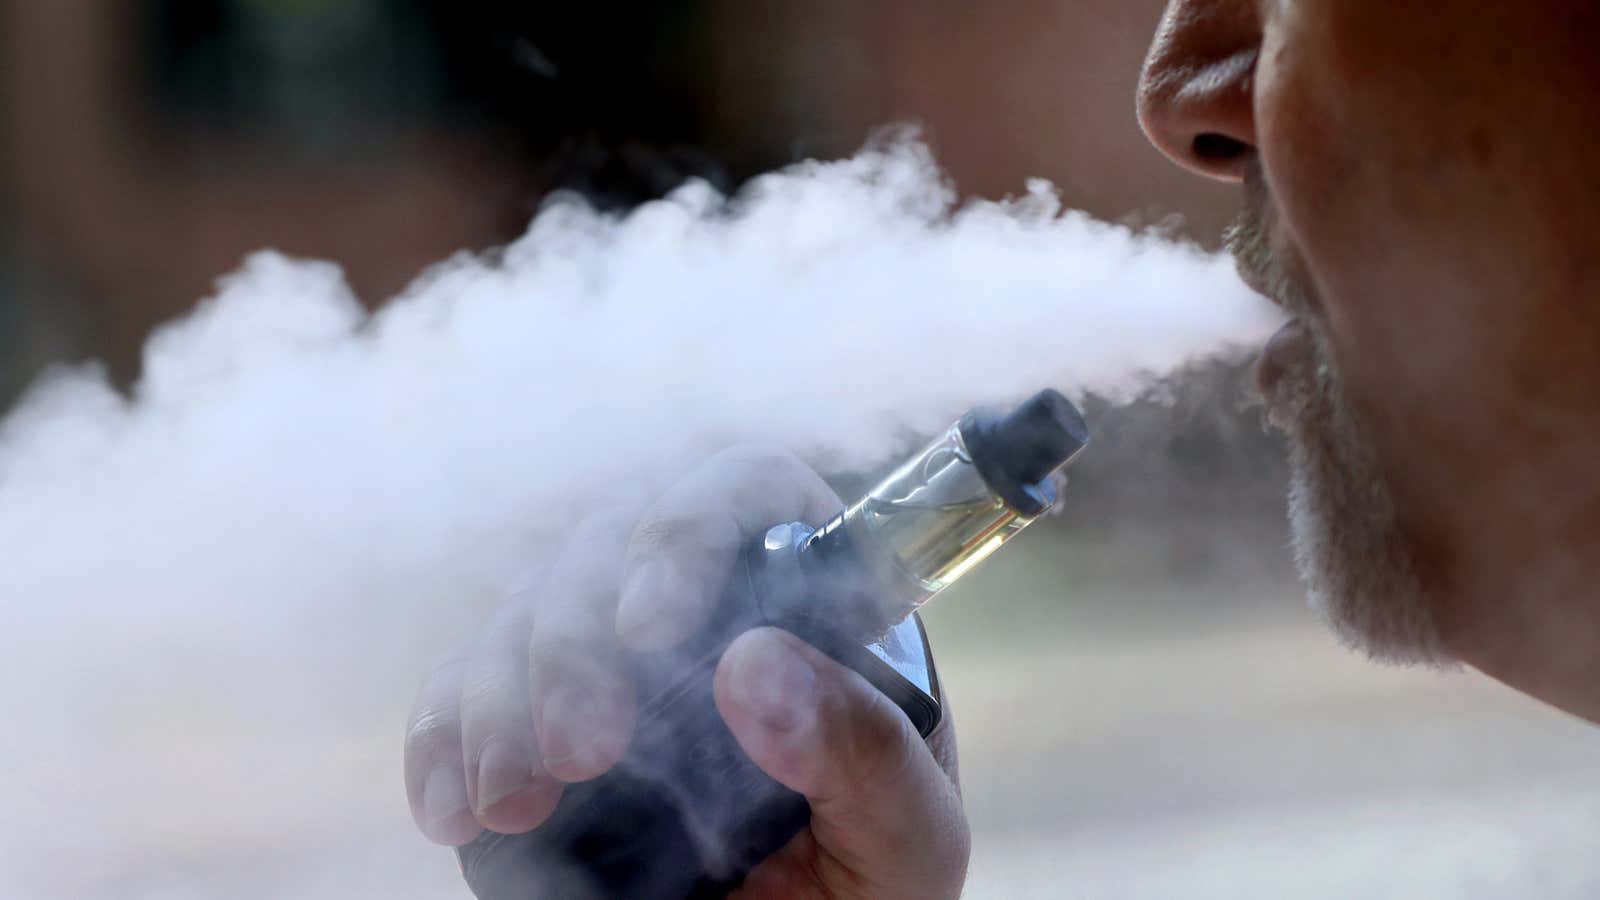 Vaping-related lung injuries have caused much alarm this year.